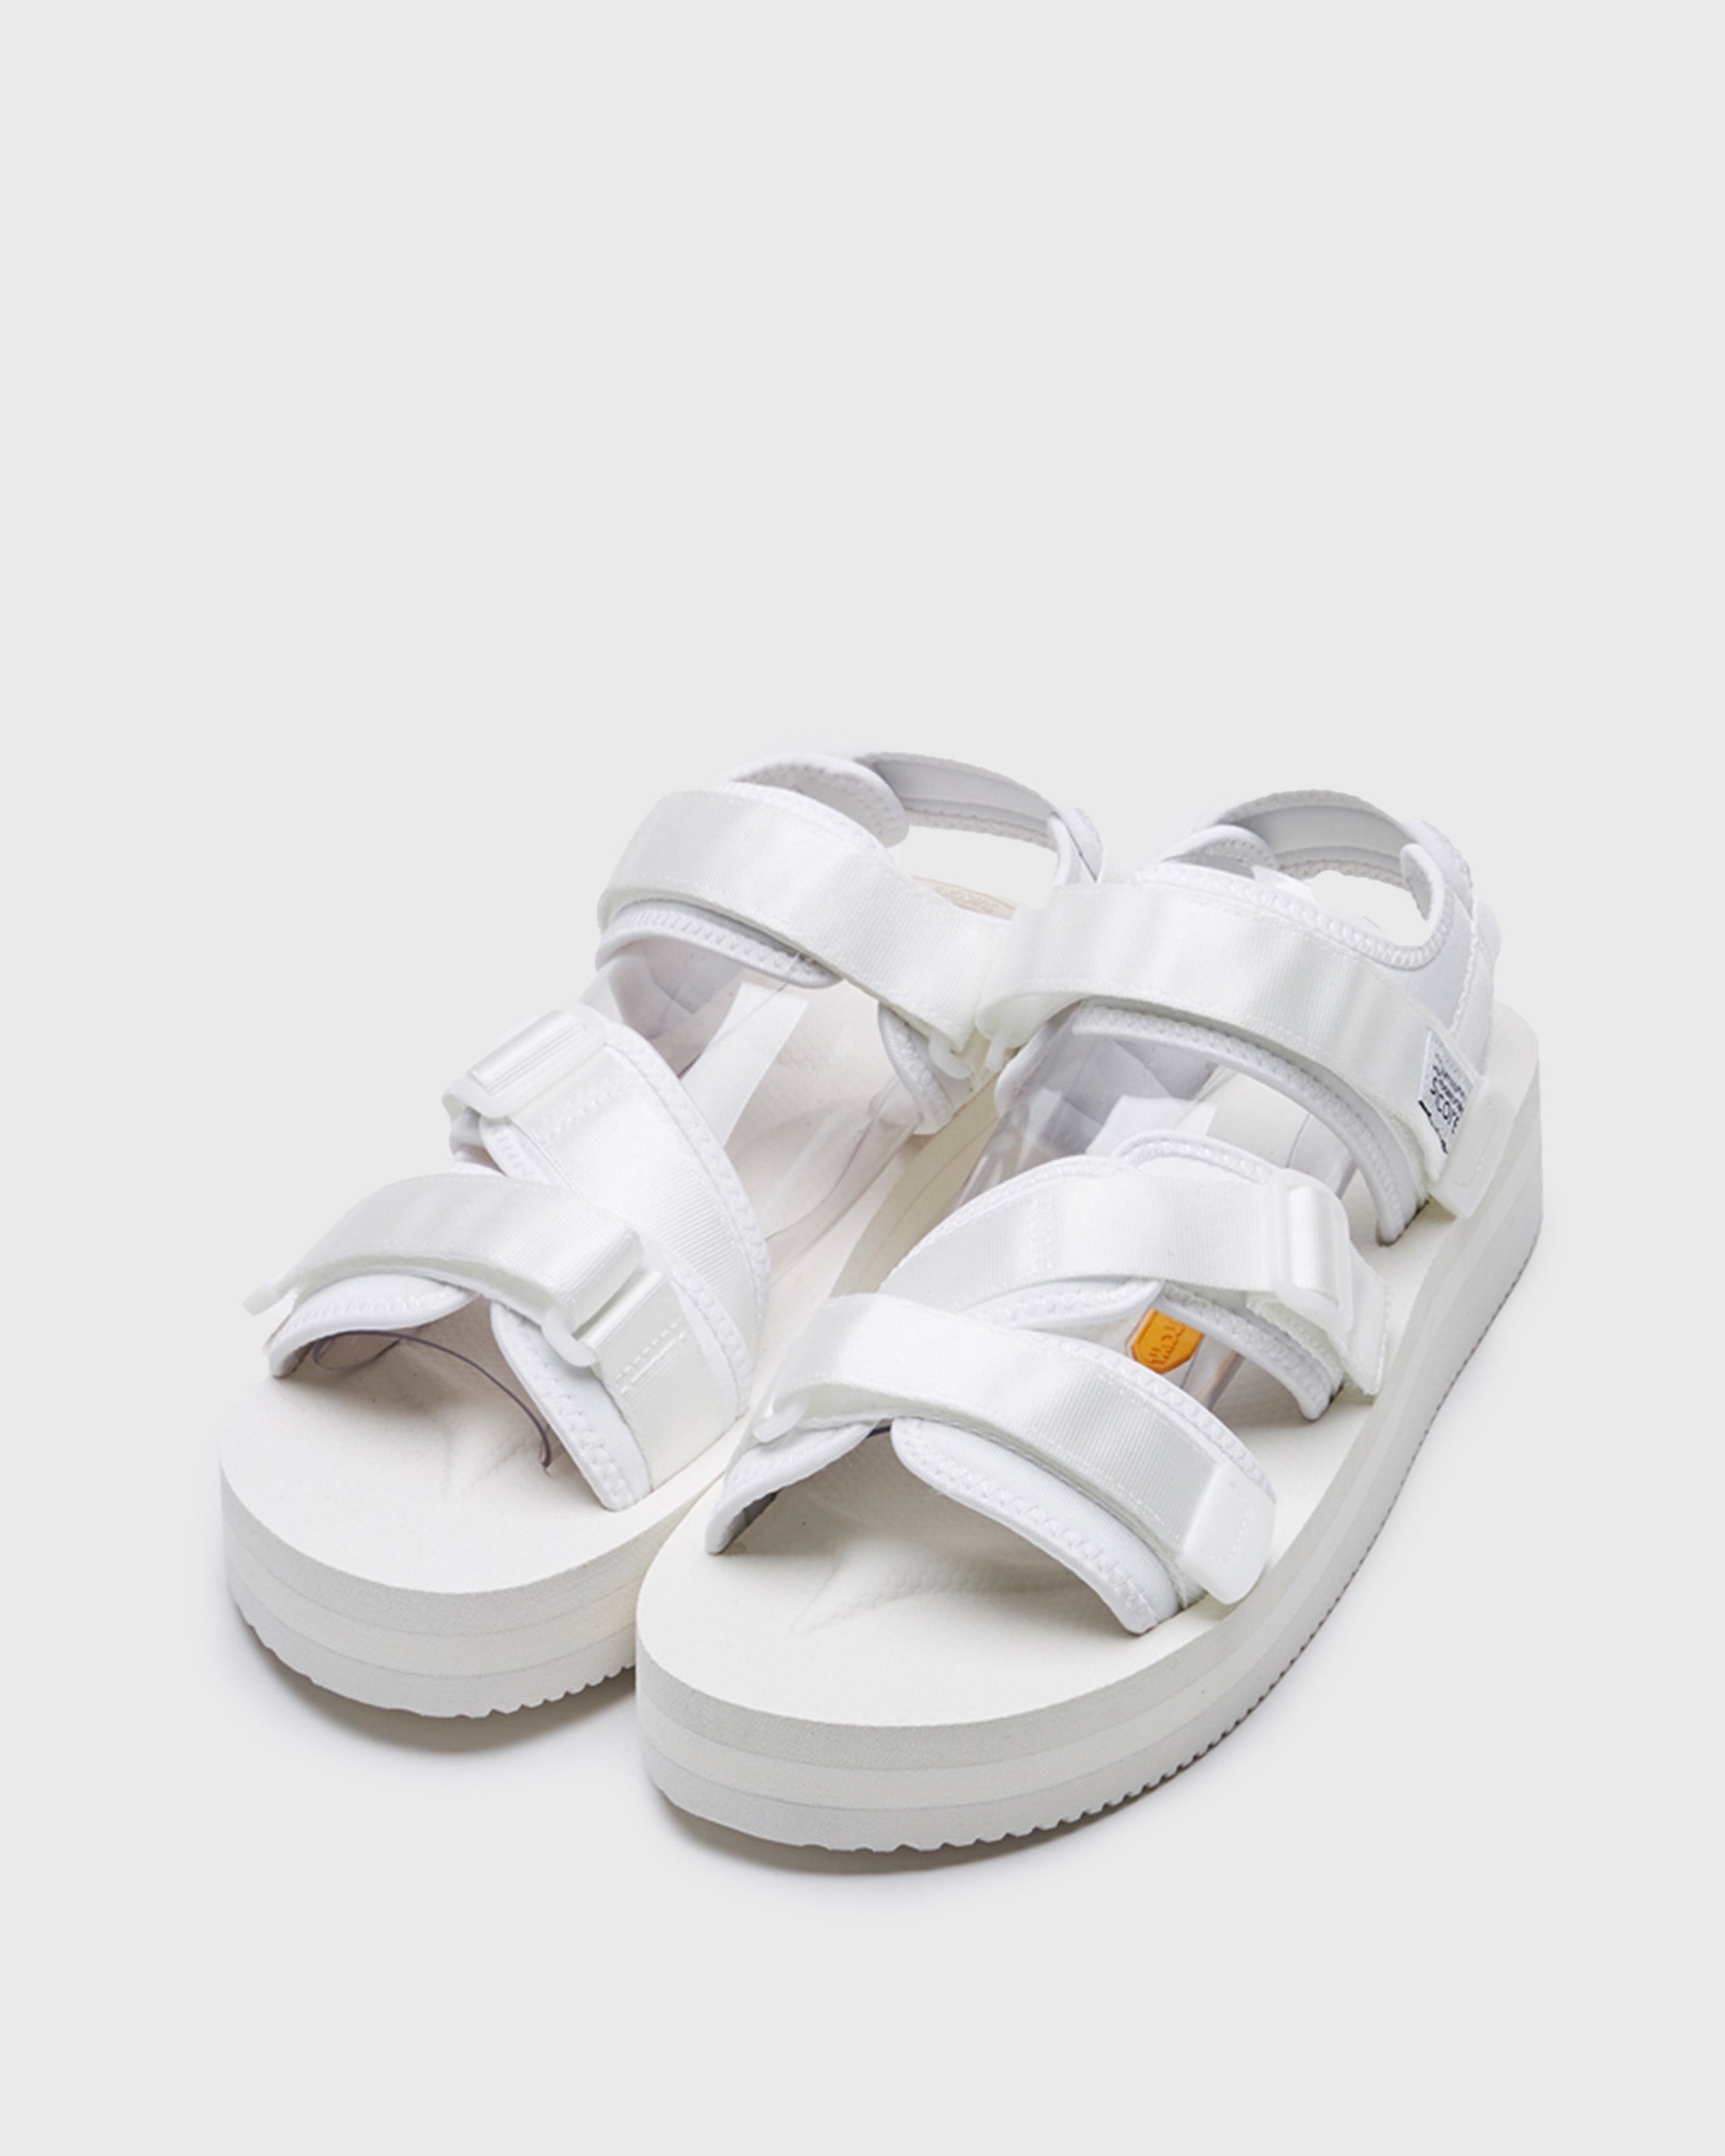 SUICOKE KISEE-VPO in White OG-044VPO | Shop from eightywingold an official brand partner for SUICOKE Canada and US.